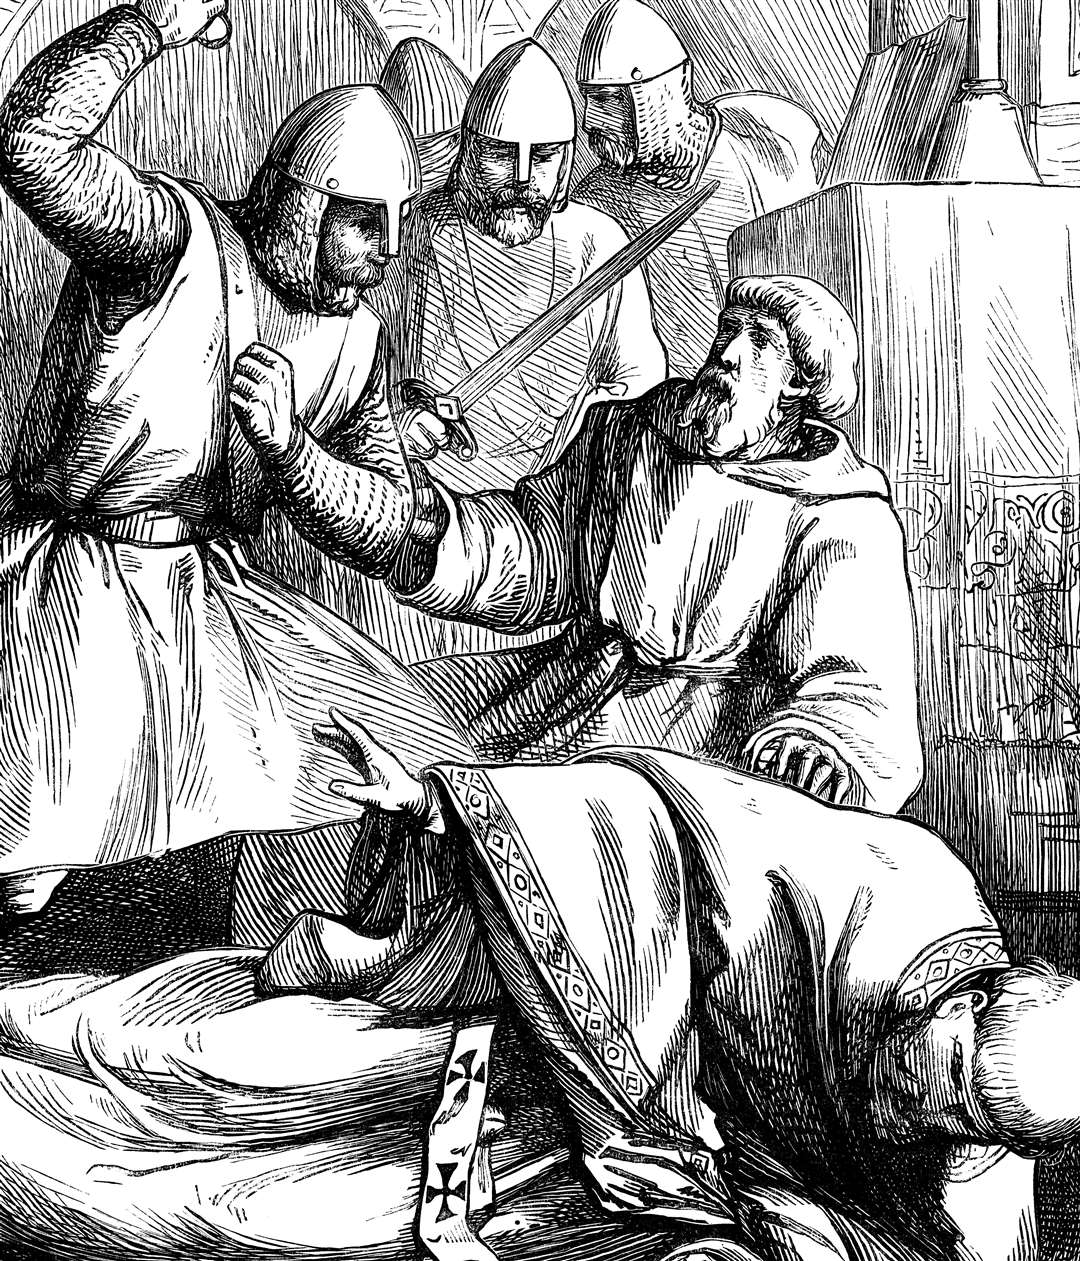 An engraved illustration of the murder of Thomas Becket